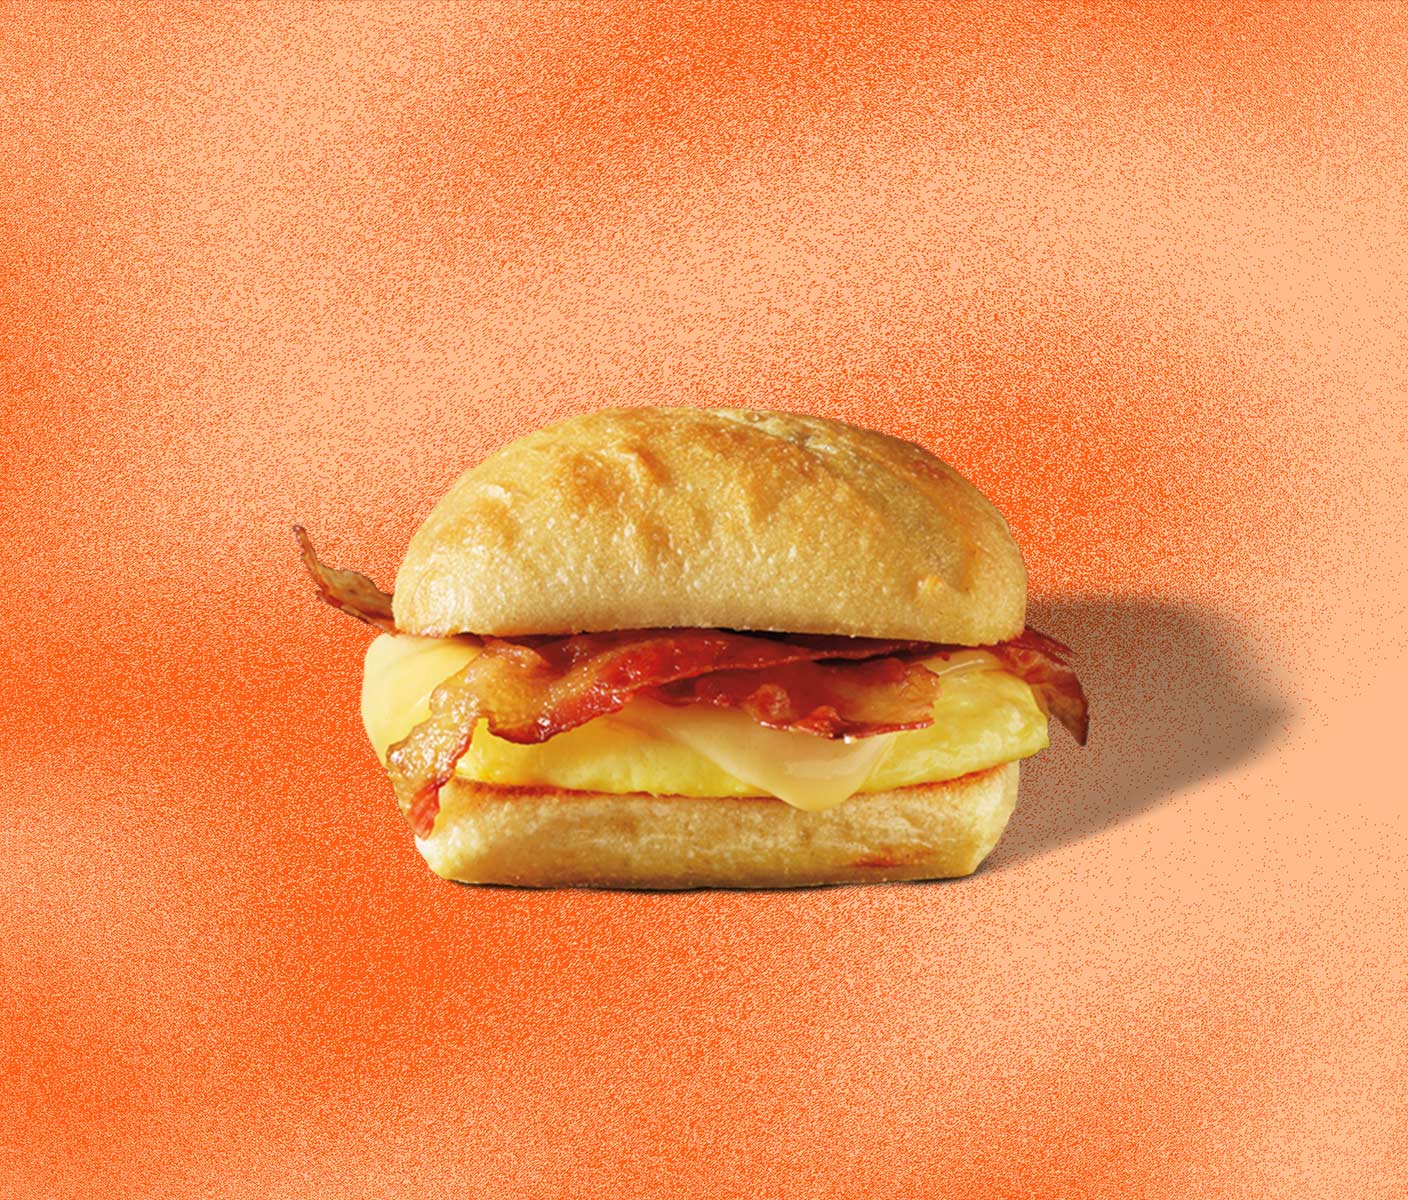 Side angle of a sandwich showing eggs, bacon and cheese between a fluffy bun.